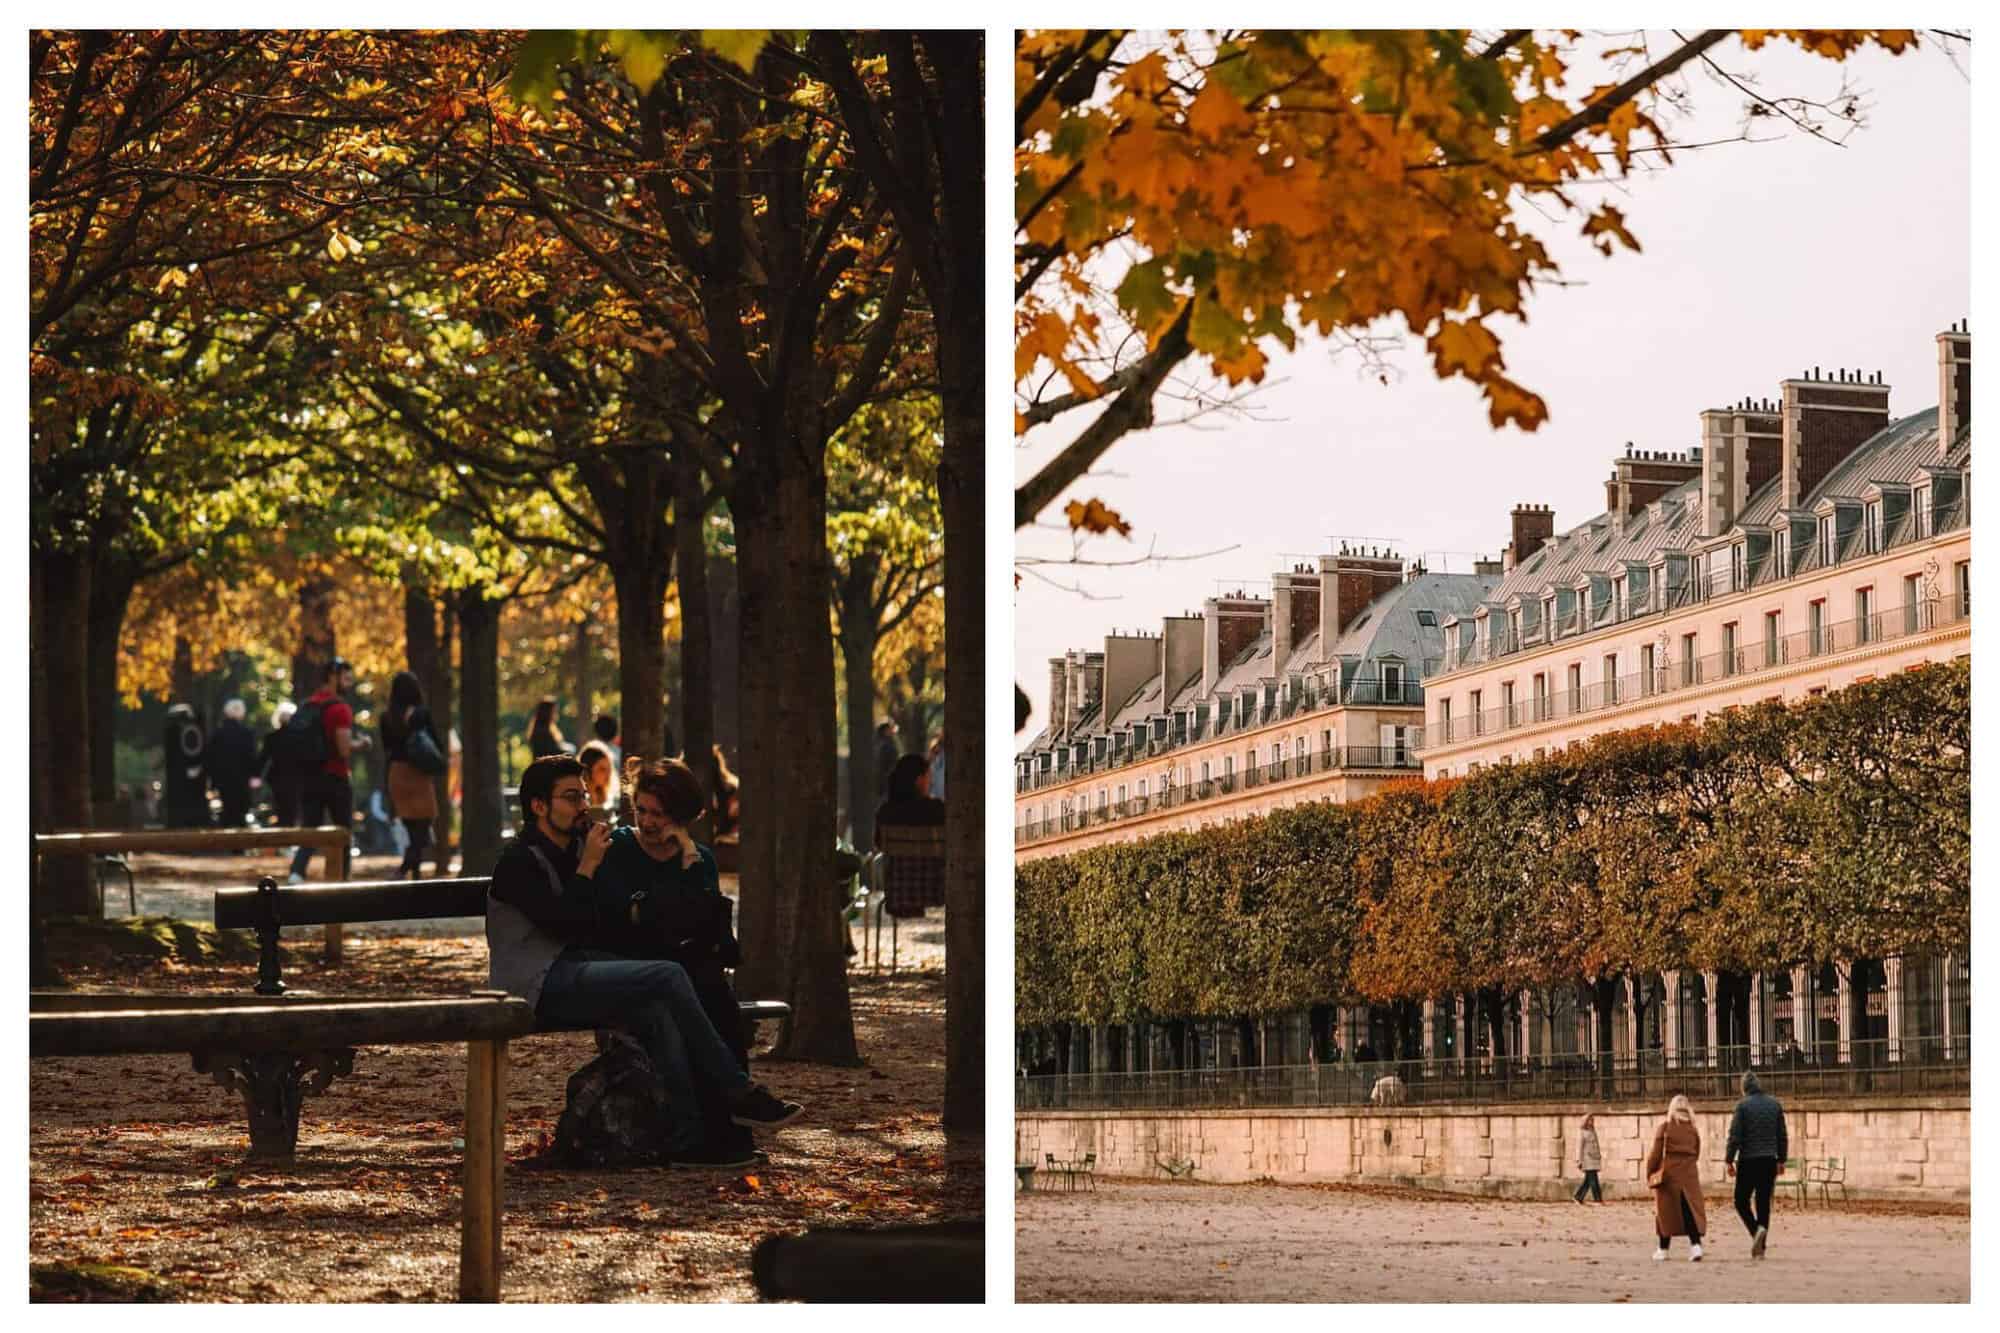 Left: a photo of a couple on a park bench in a garden in Paris. A photo of a couple walking together in Jardin de Tuleries, Paris.